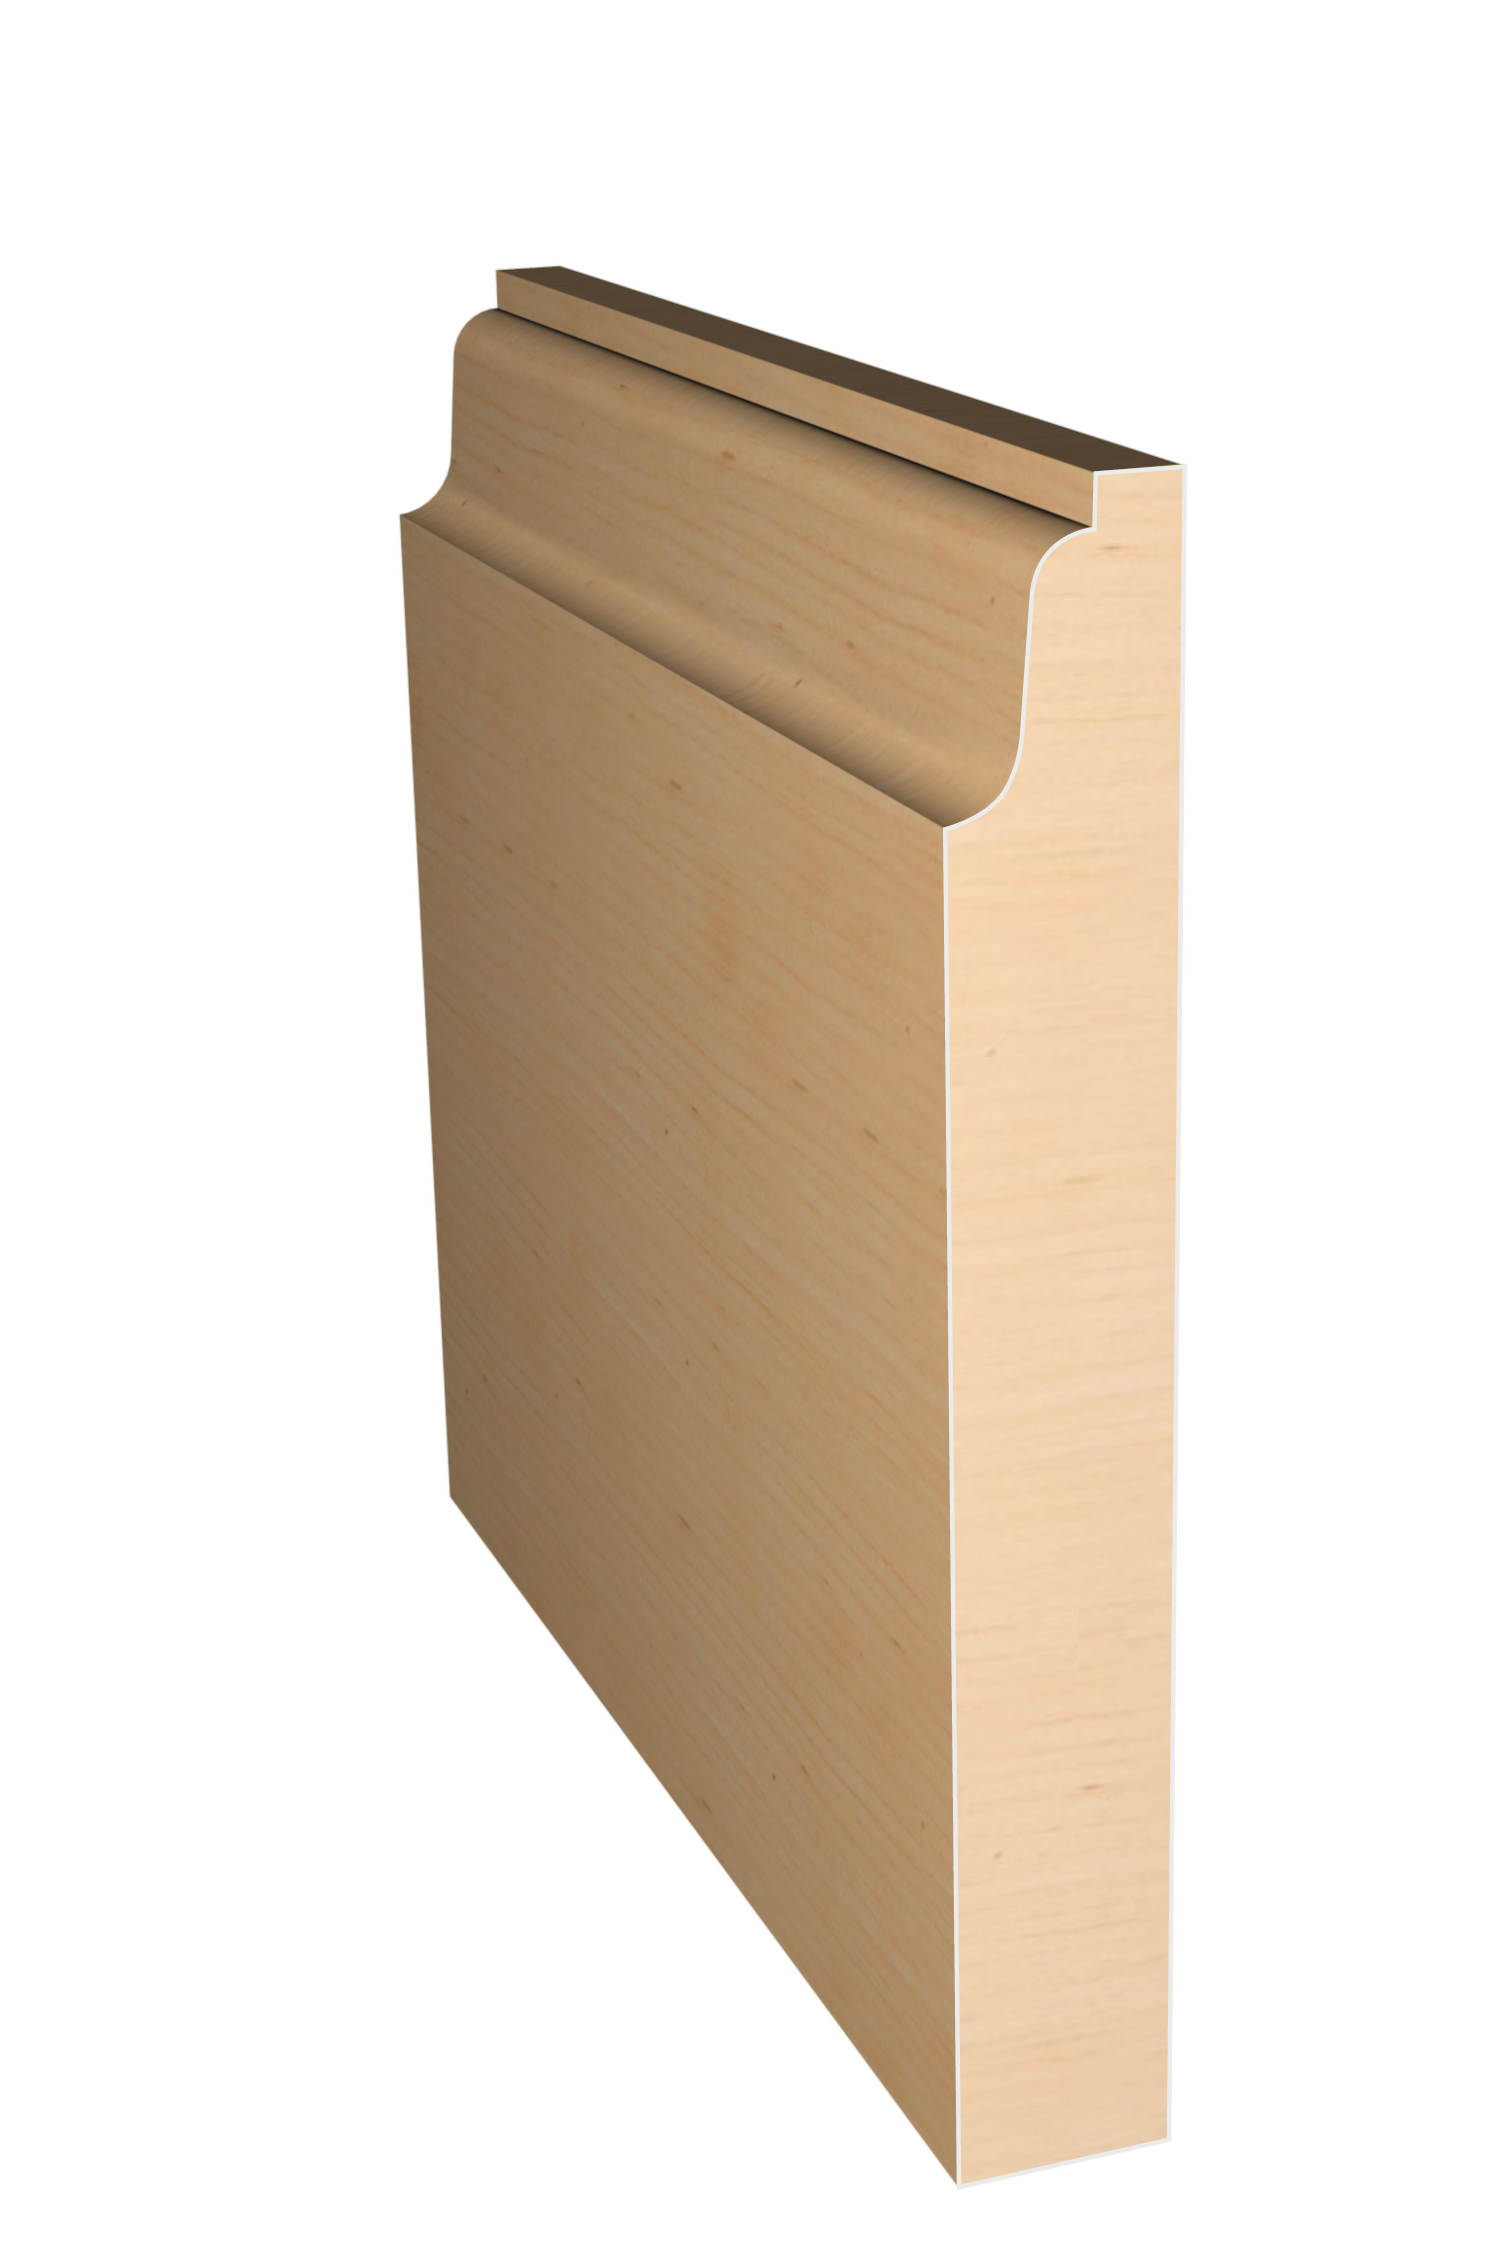 Three dimensional rendering of custom base wood molding BAPL51214 made by Public Lumber Company in Detroit.